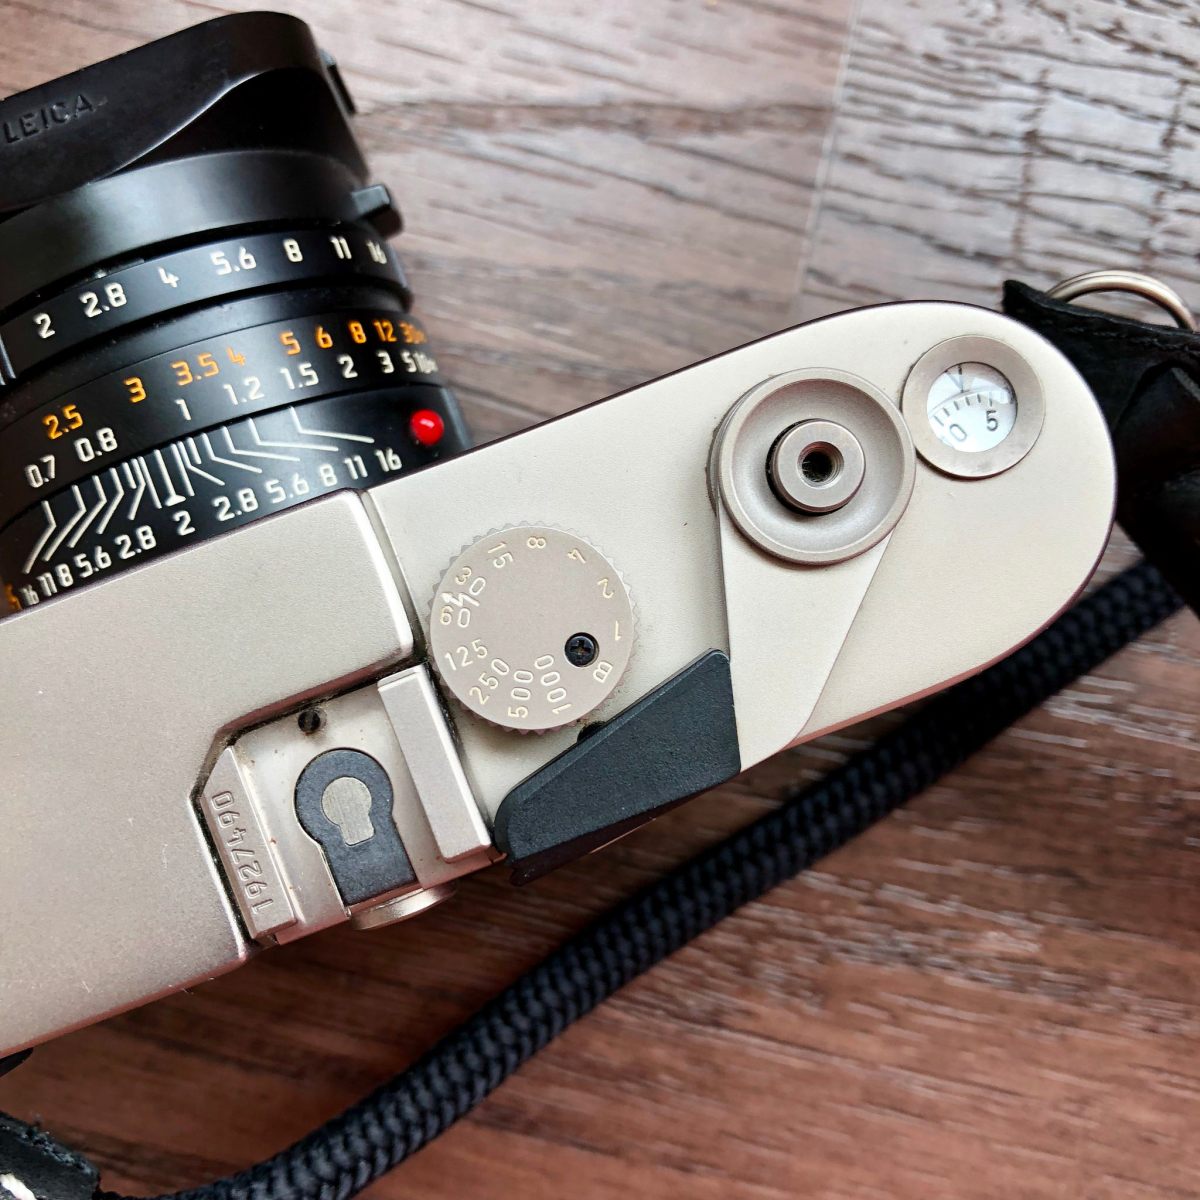 Review of the The Leica M6 Film camera & 35mm Summicron – the